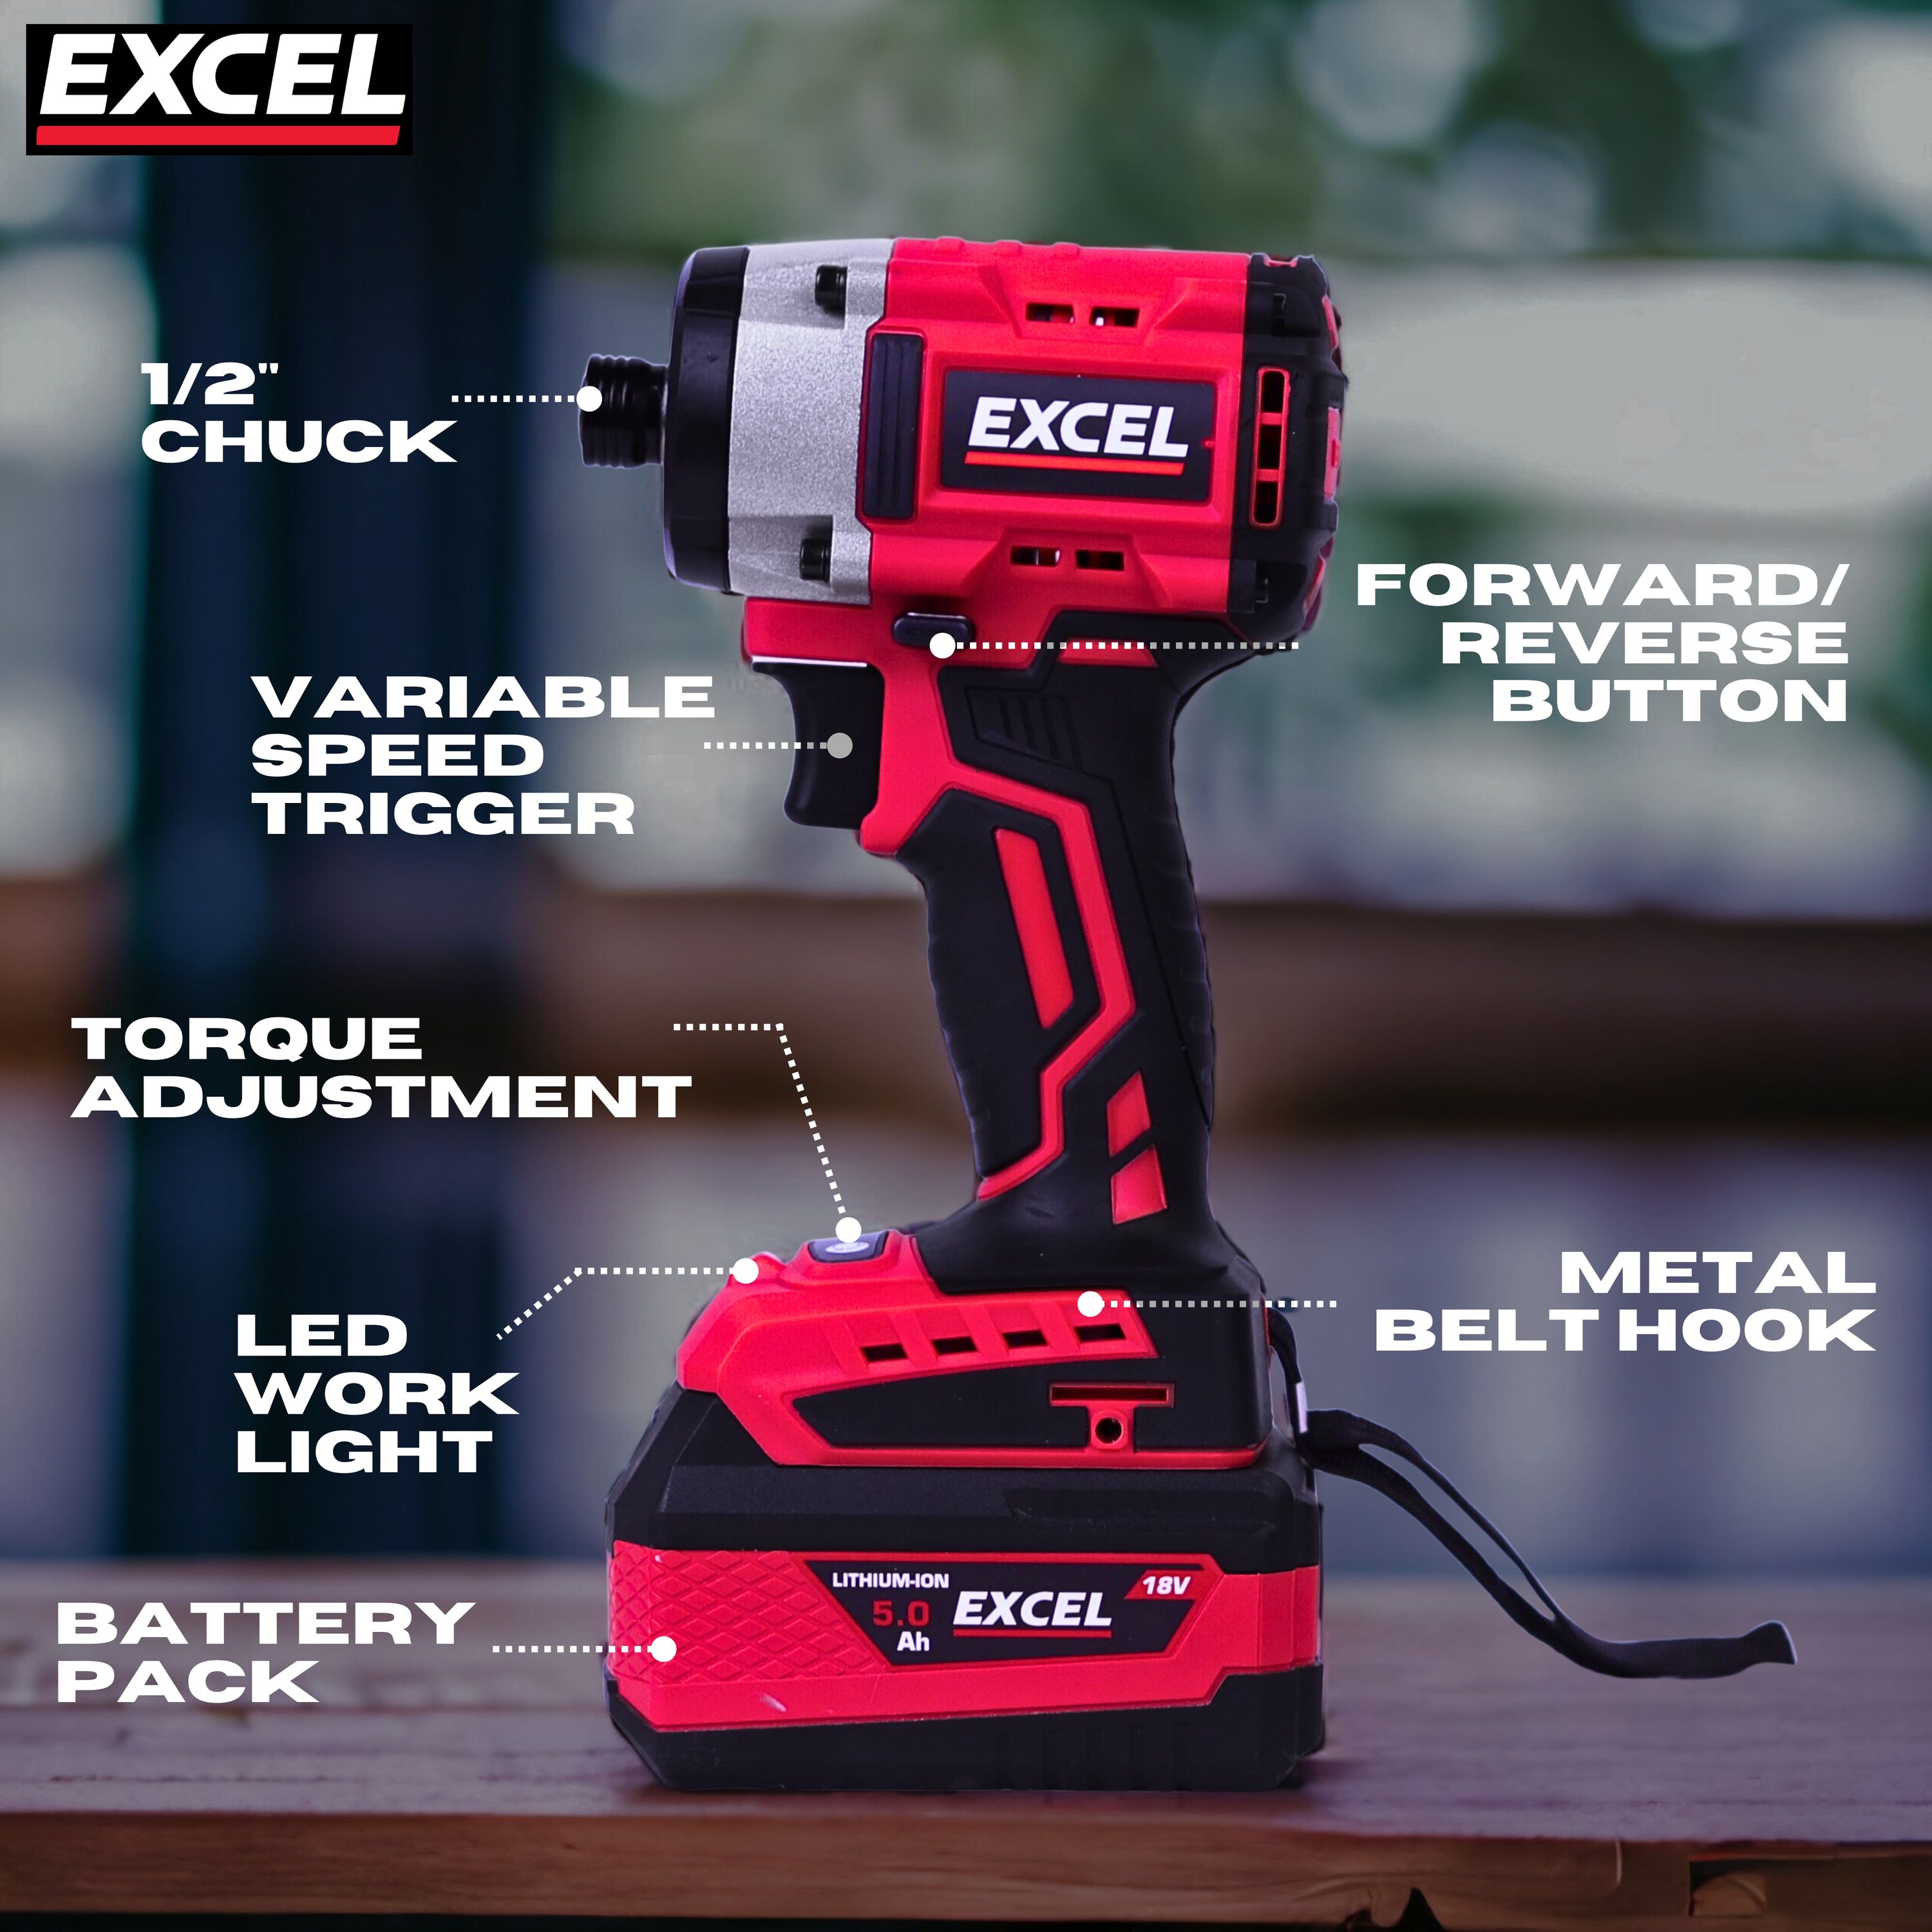 Excel 18V 7 Piece Power Tool Kit with 3 x 5.0Ah Batteries & Charger EXLKIT-16290